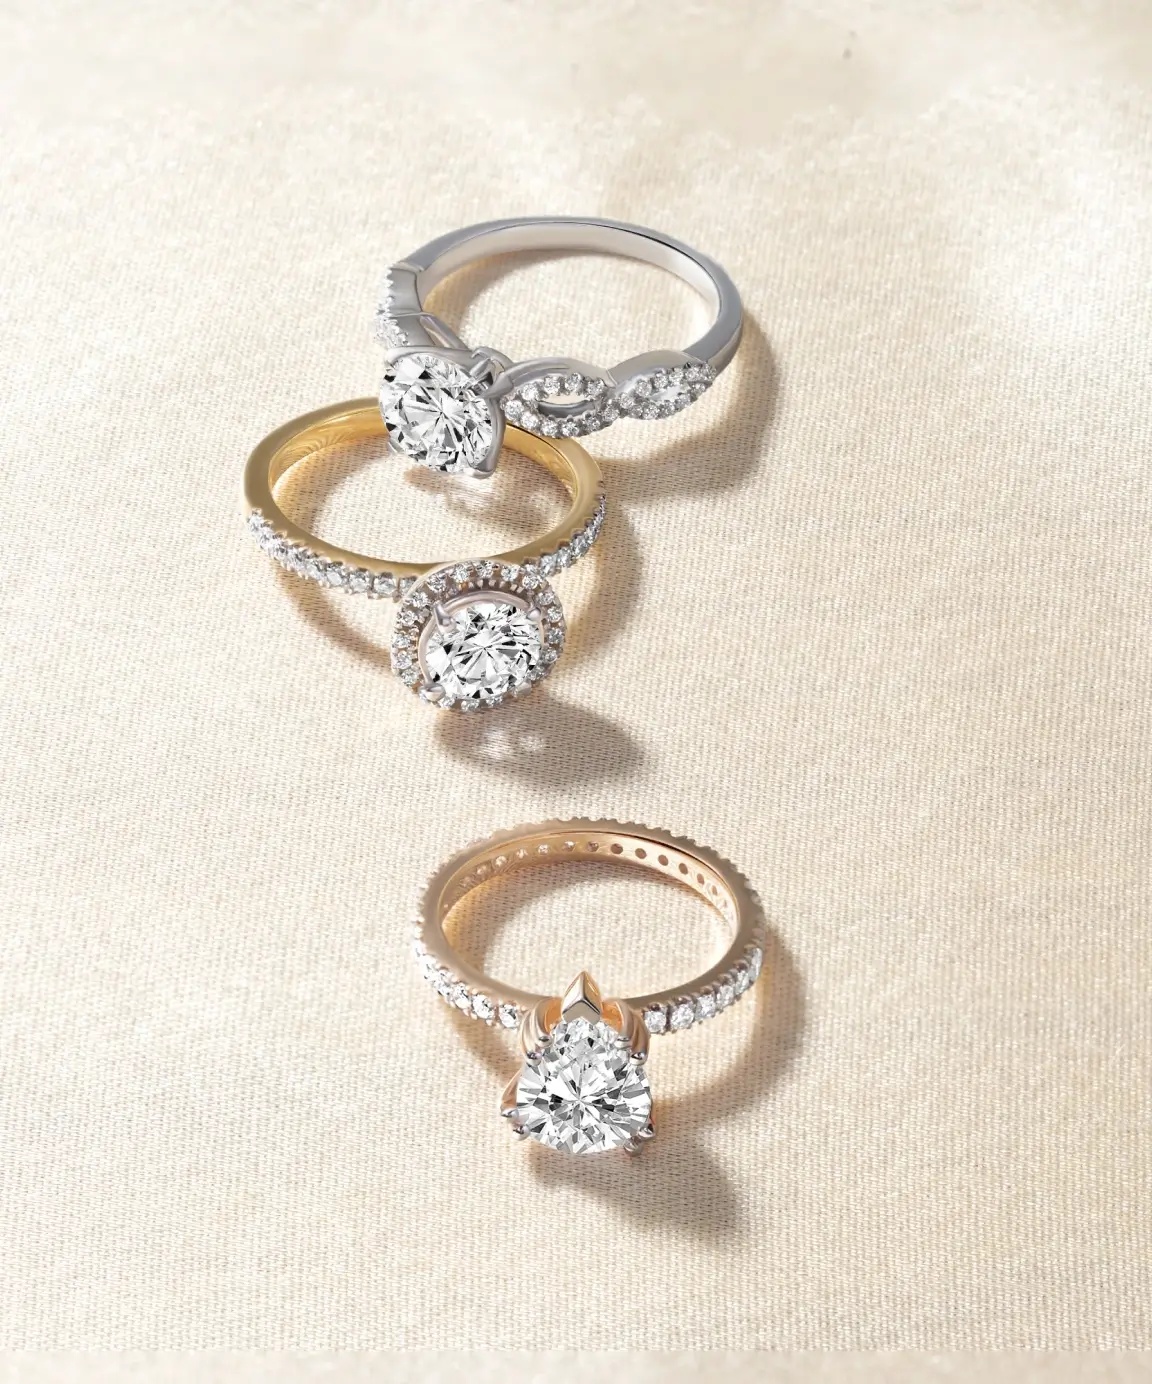 Discover the Most Popular Engagement Rings in 2022